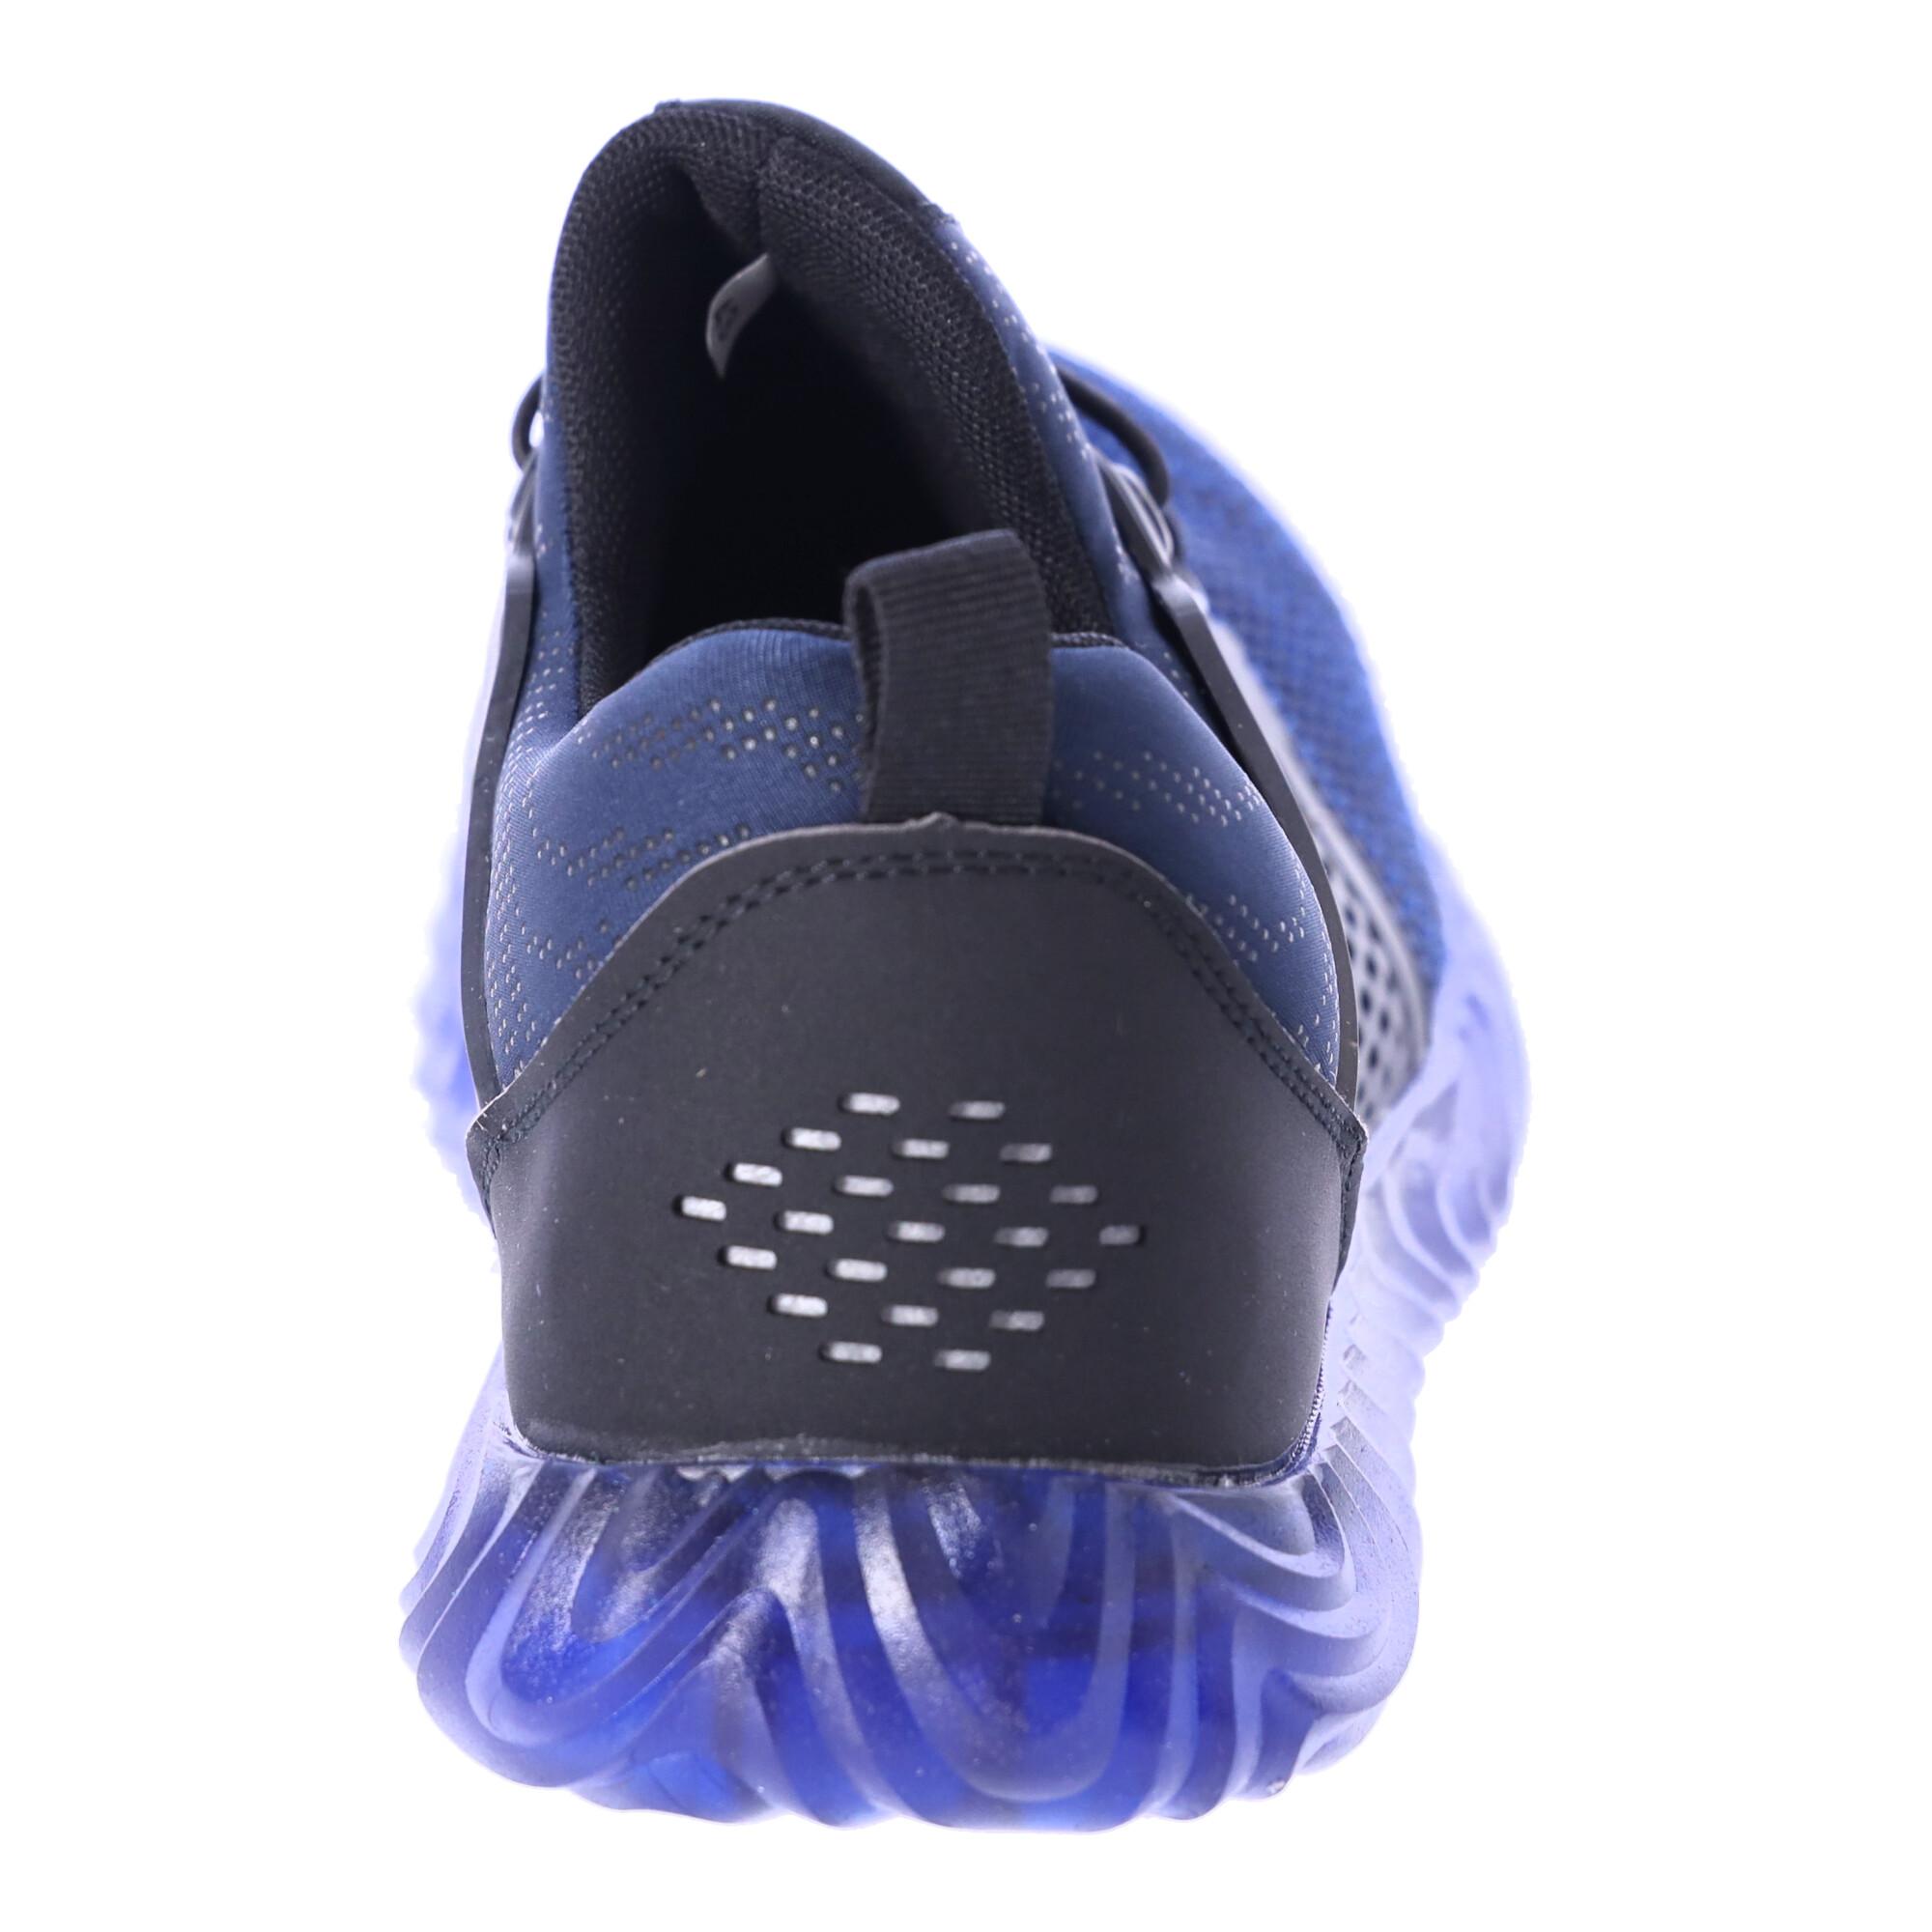 Work safety shoes"40" - navy blue